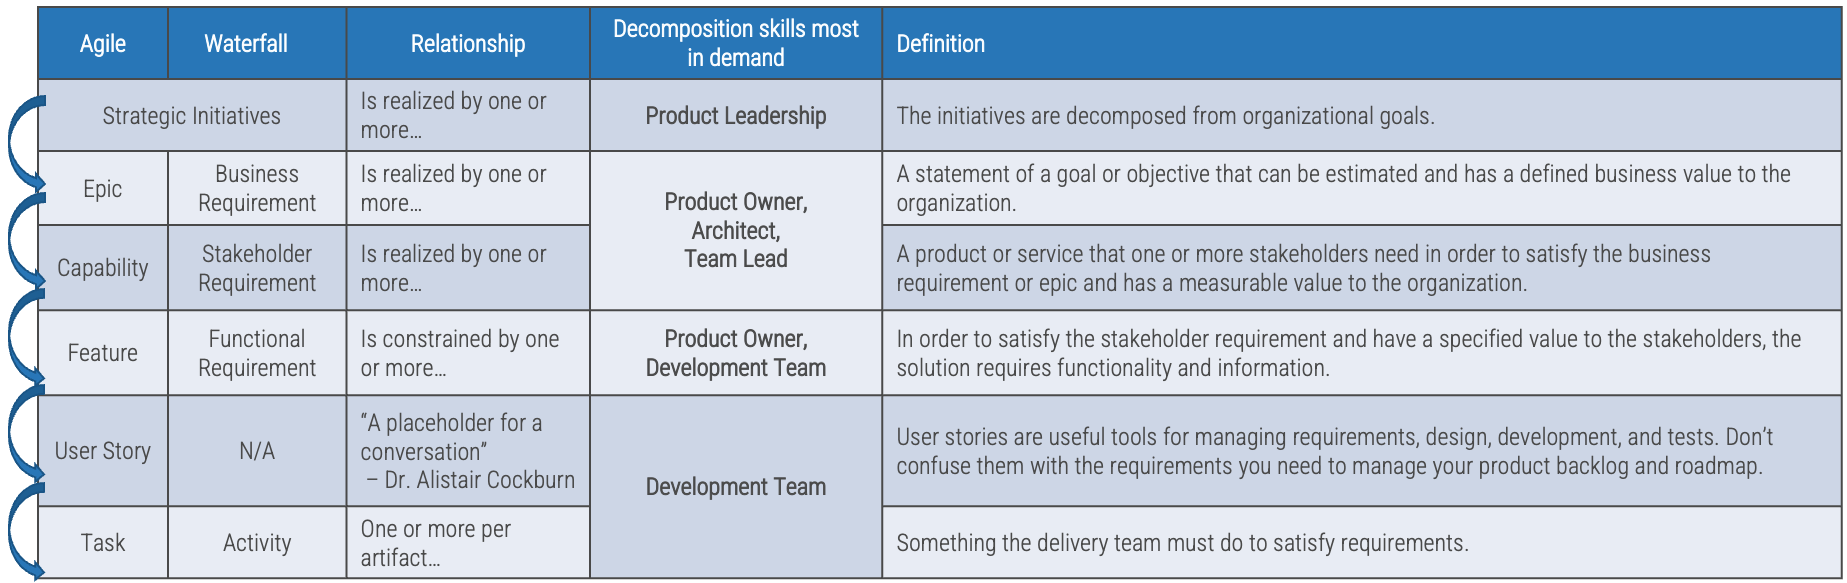 Agile, Waterfall, Relationship, Decomposition skill most in demand, definition.